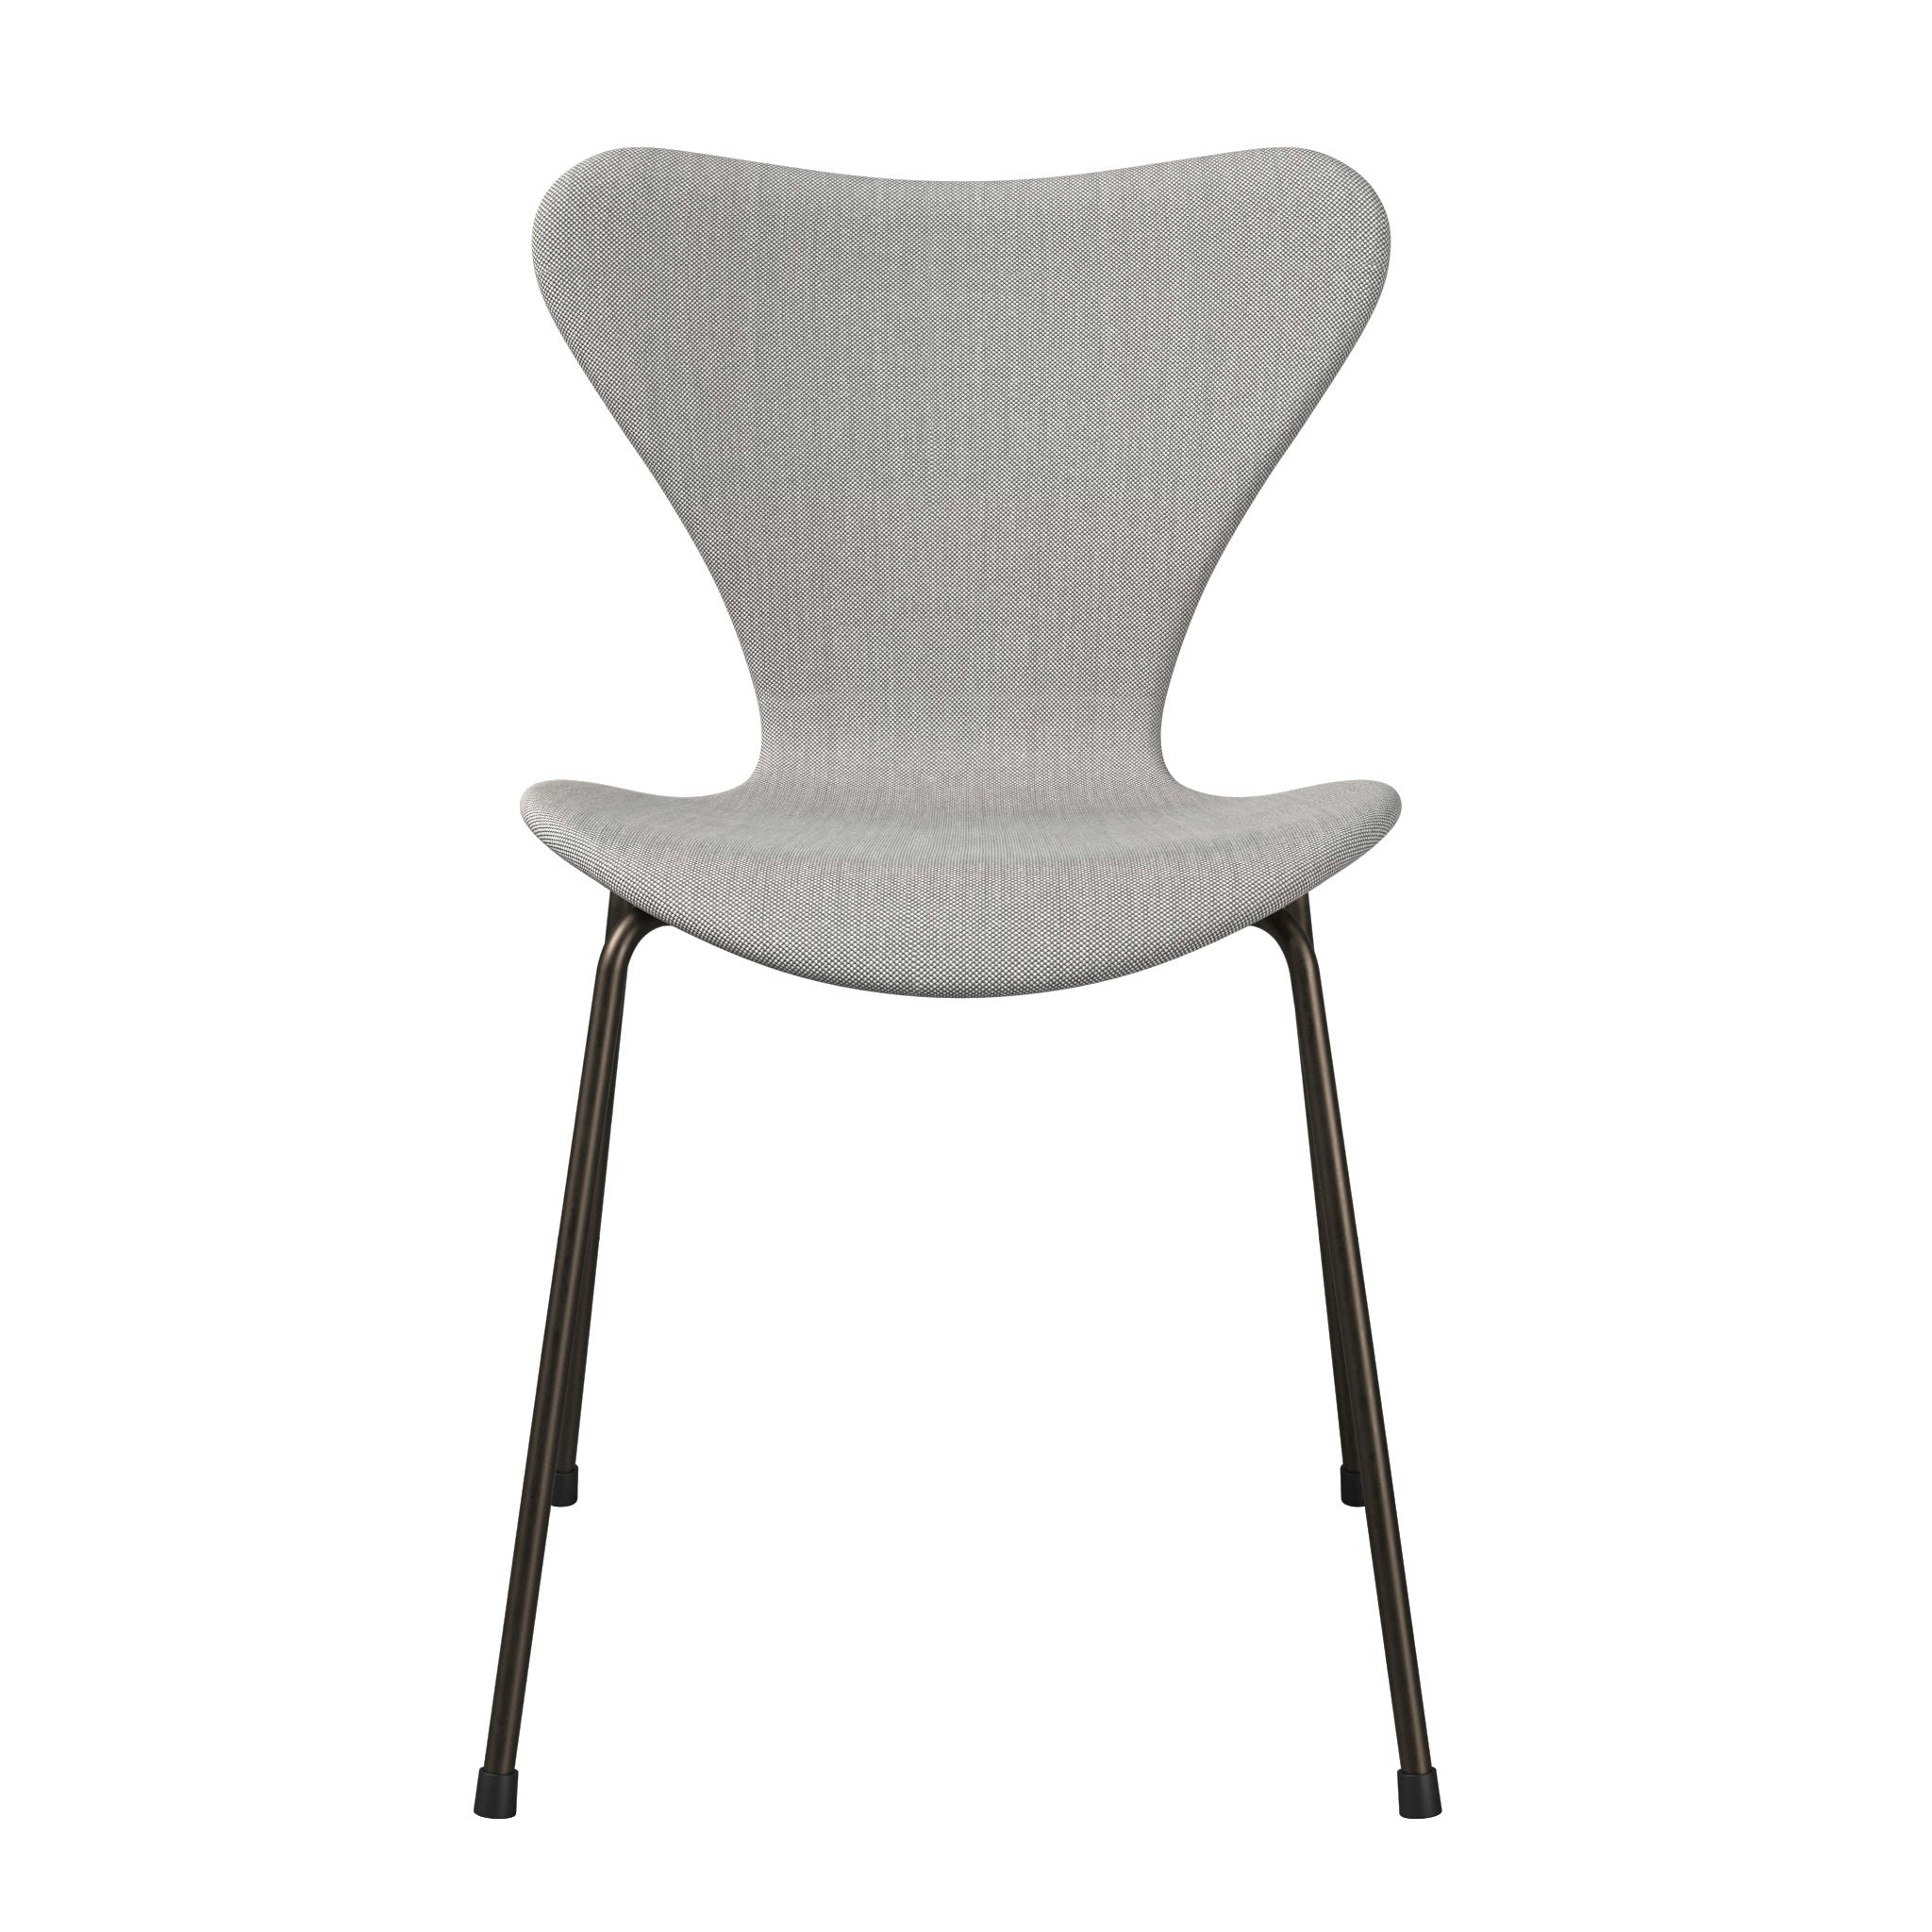 Series 7 Fully Upholstered Chair by Fritz Hansen